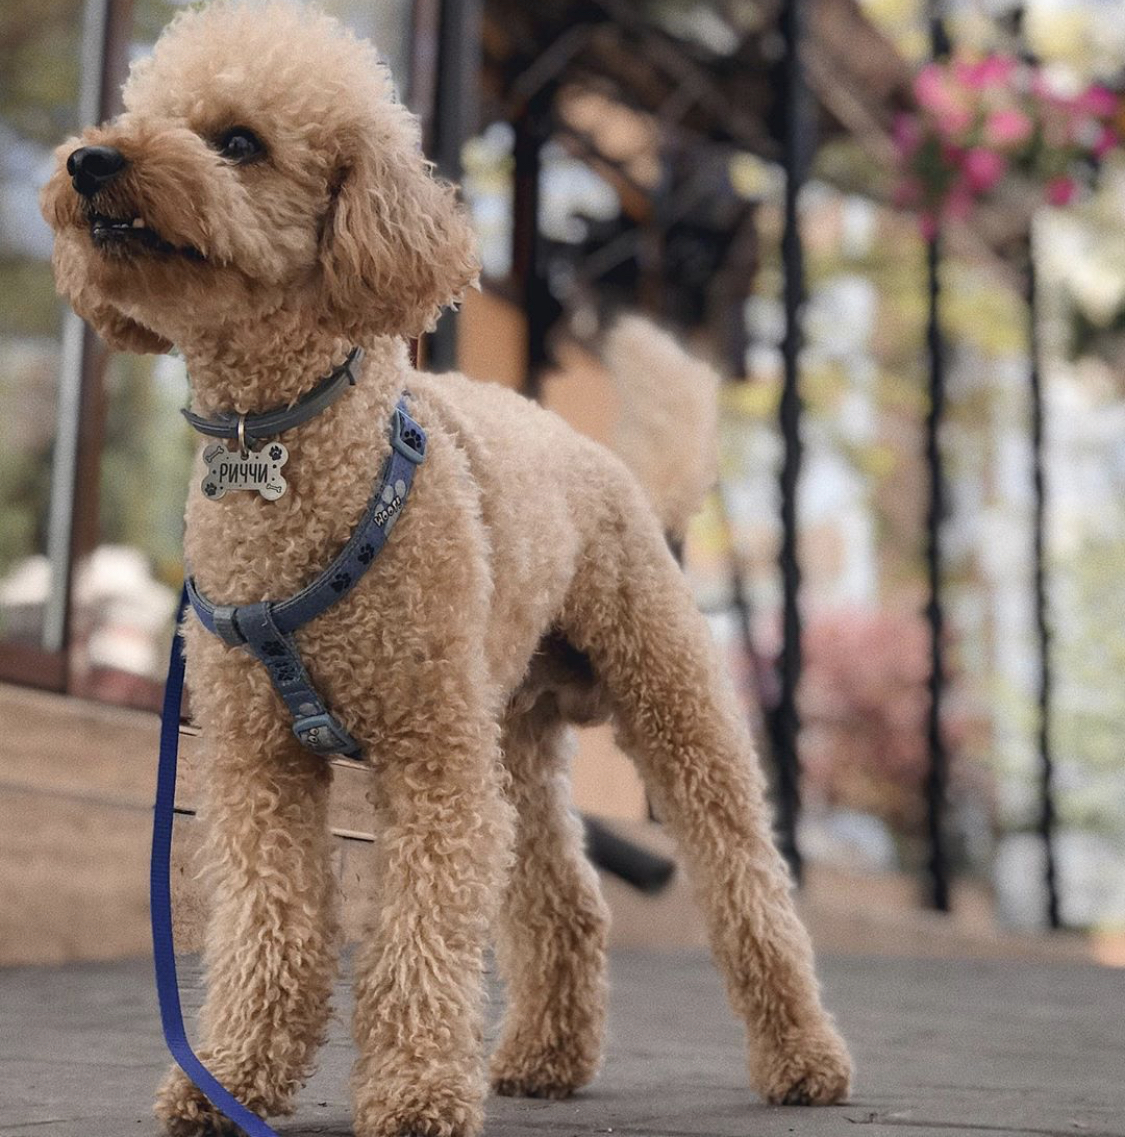 A Poodle standing at the park